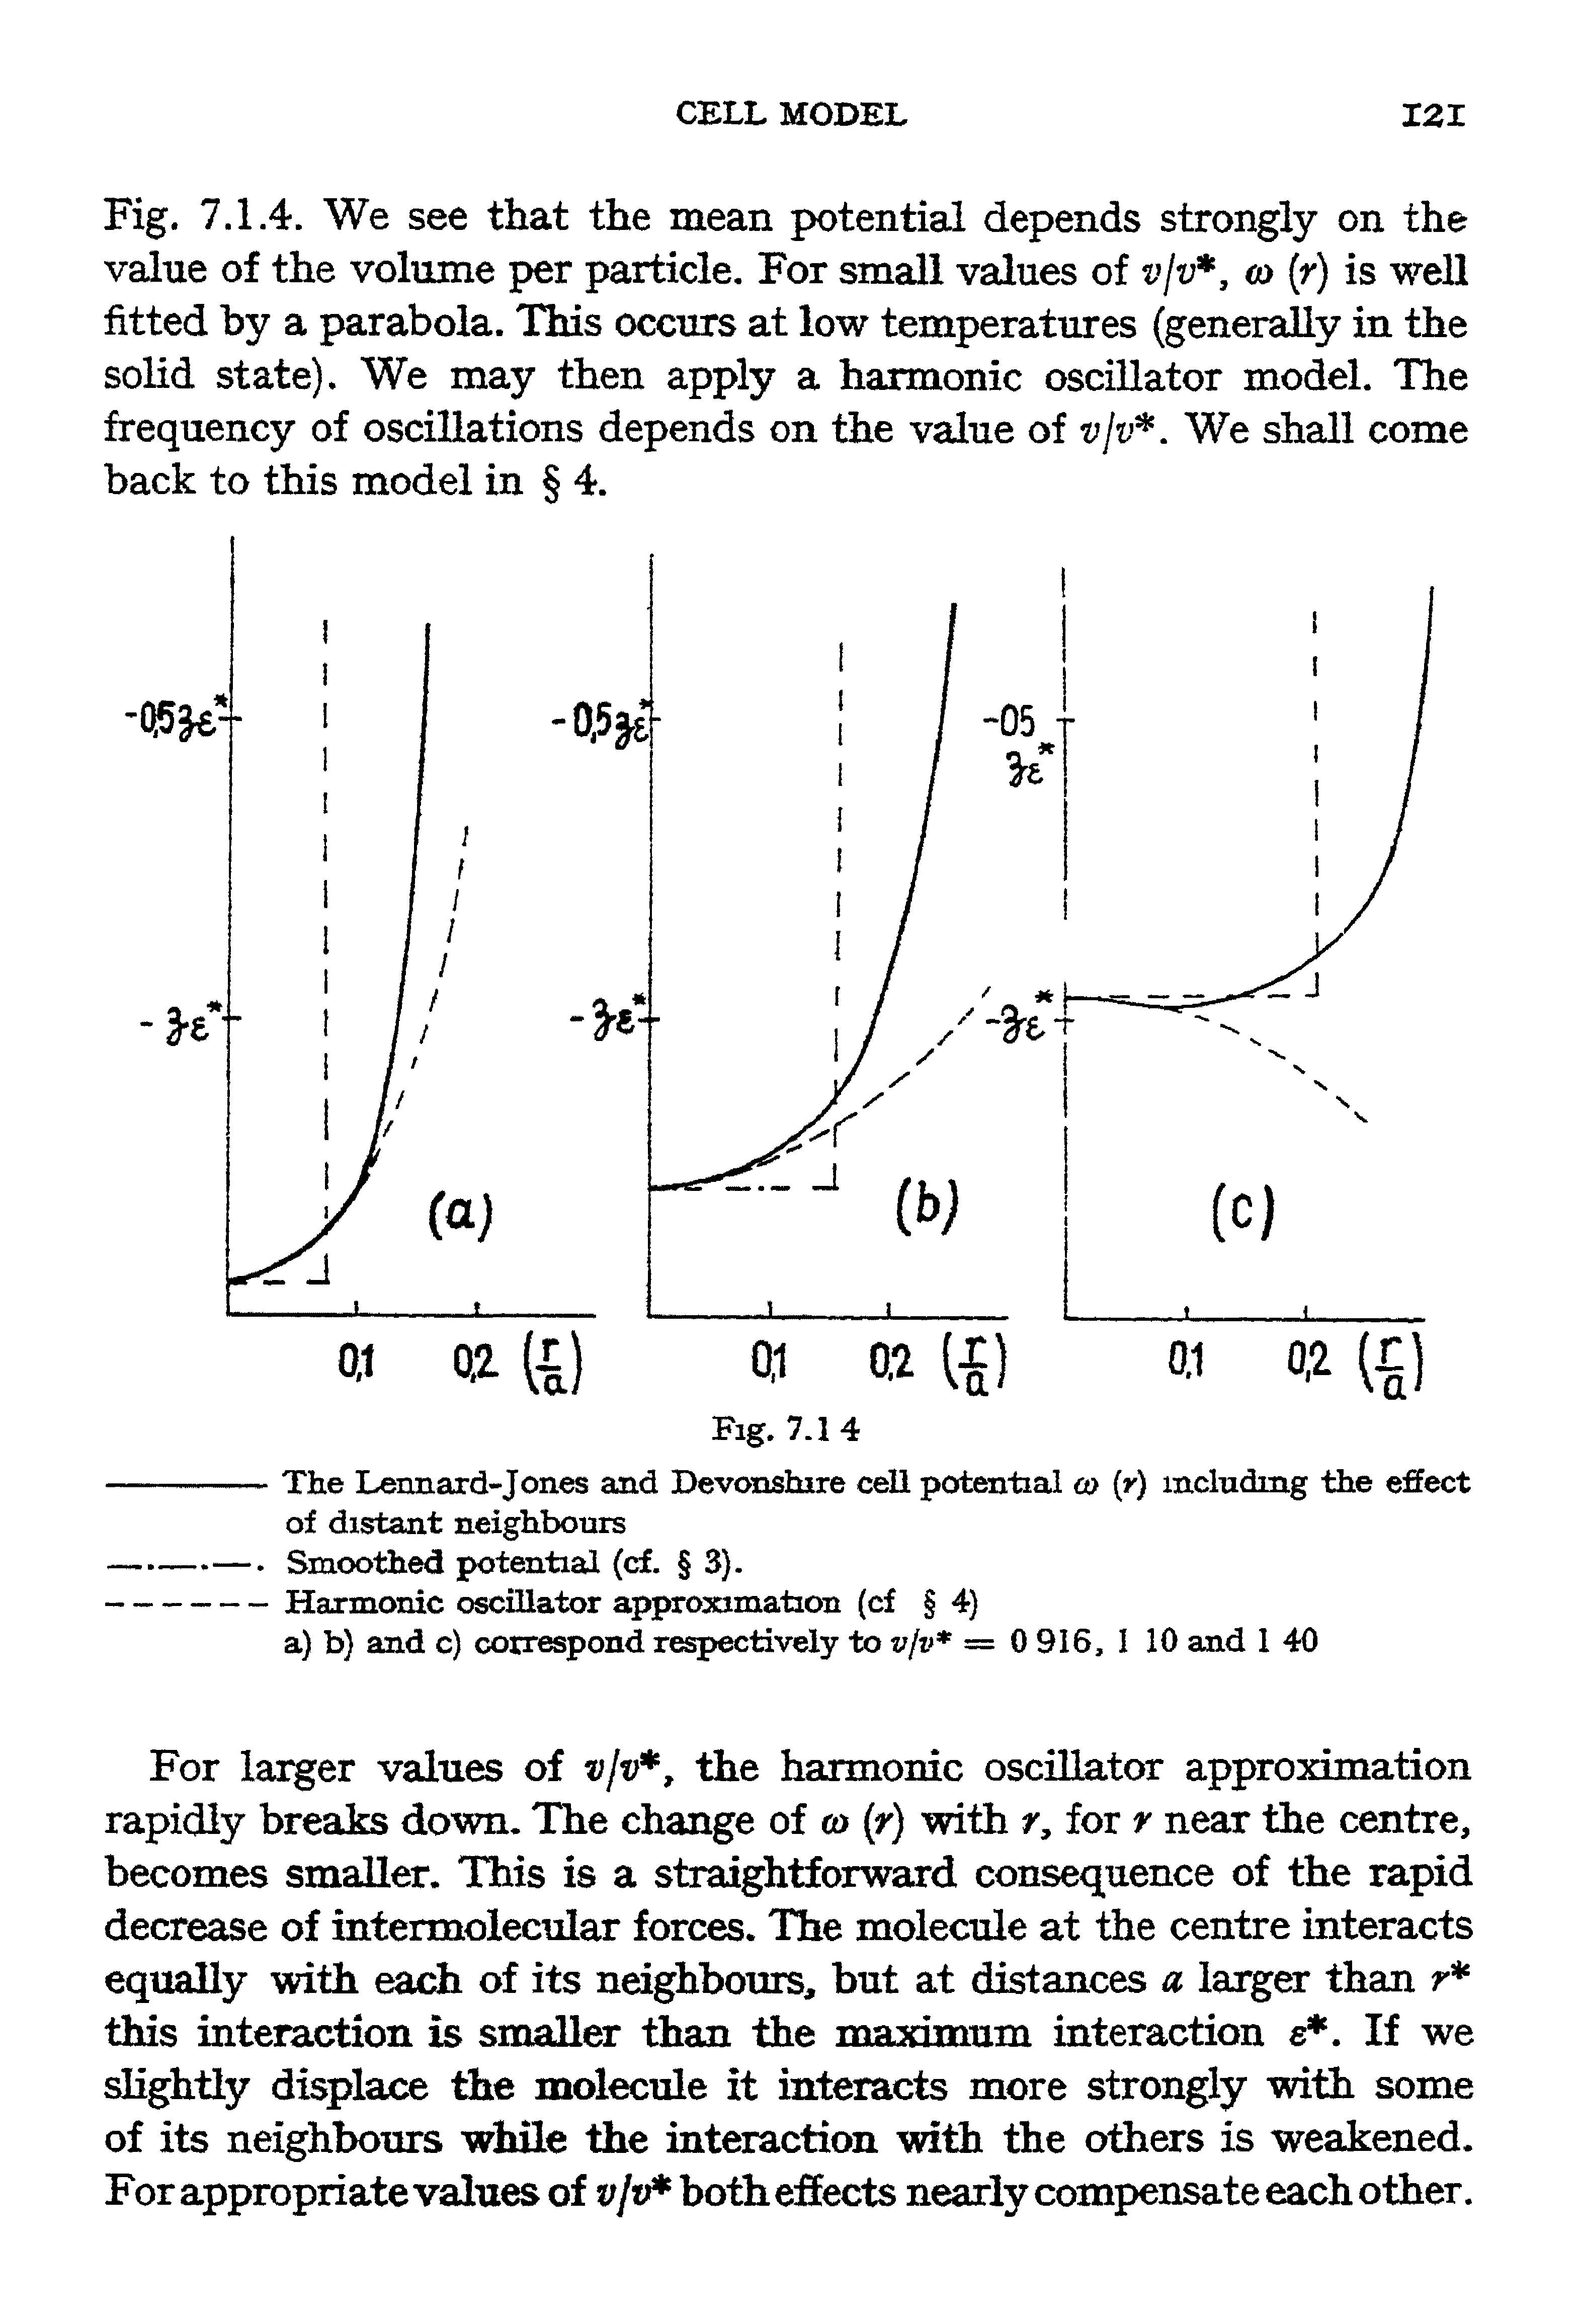 Fig. 7.1.4. We see that the mean potential depends strongly on the value of the volume per particle. For small values of vjv, (o (r) is well fitted by a parabola. This occurs at low temperatures (generally in the solid state). We may then apply a harmonic oscillator model. The frequency of oscillations depends on the value of vjv. We shall come back to this model in 4.